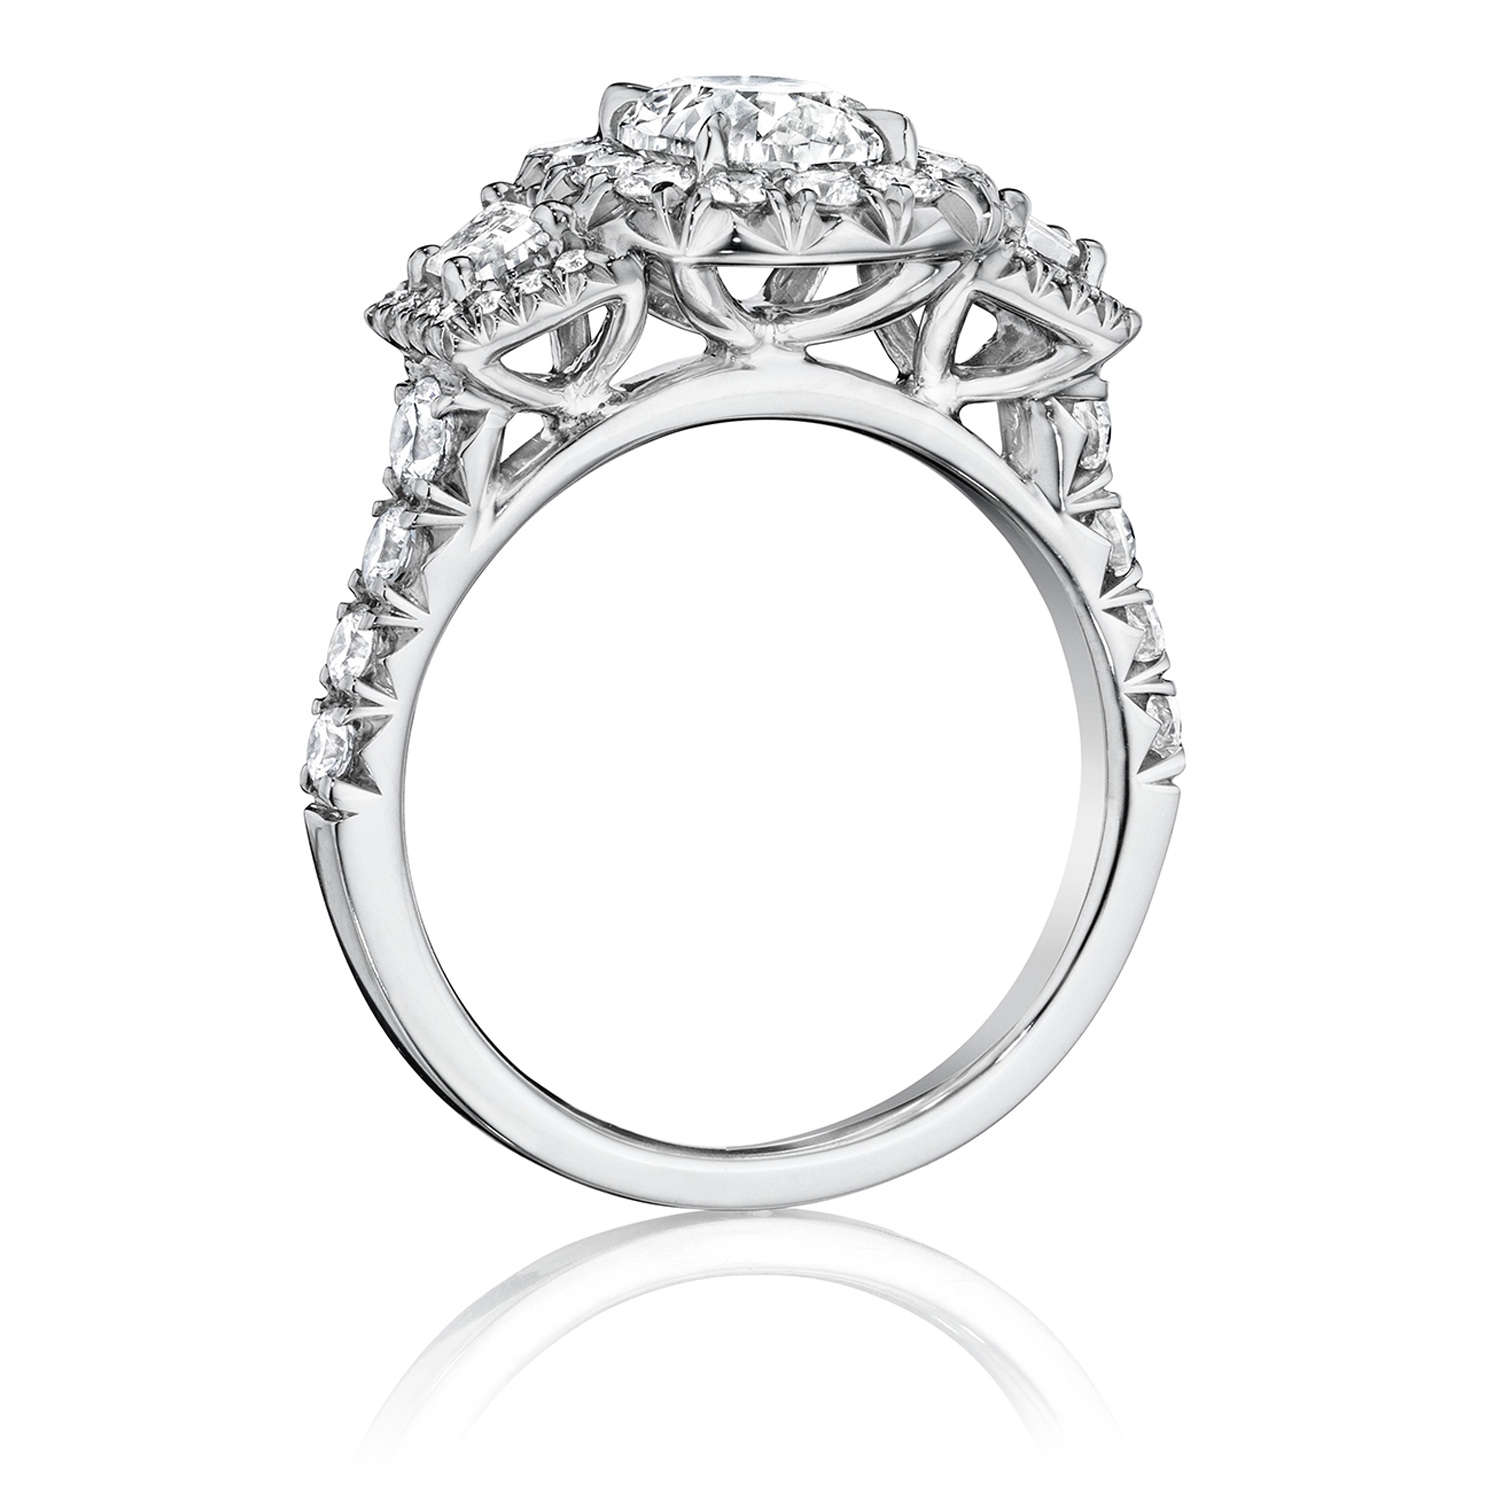 Henri Daussi ACMT Cushion Halo with Trapezoid Diamonds Engagement Ring Alternative View 1